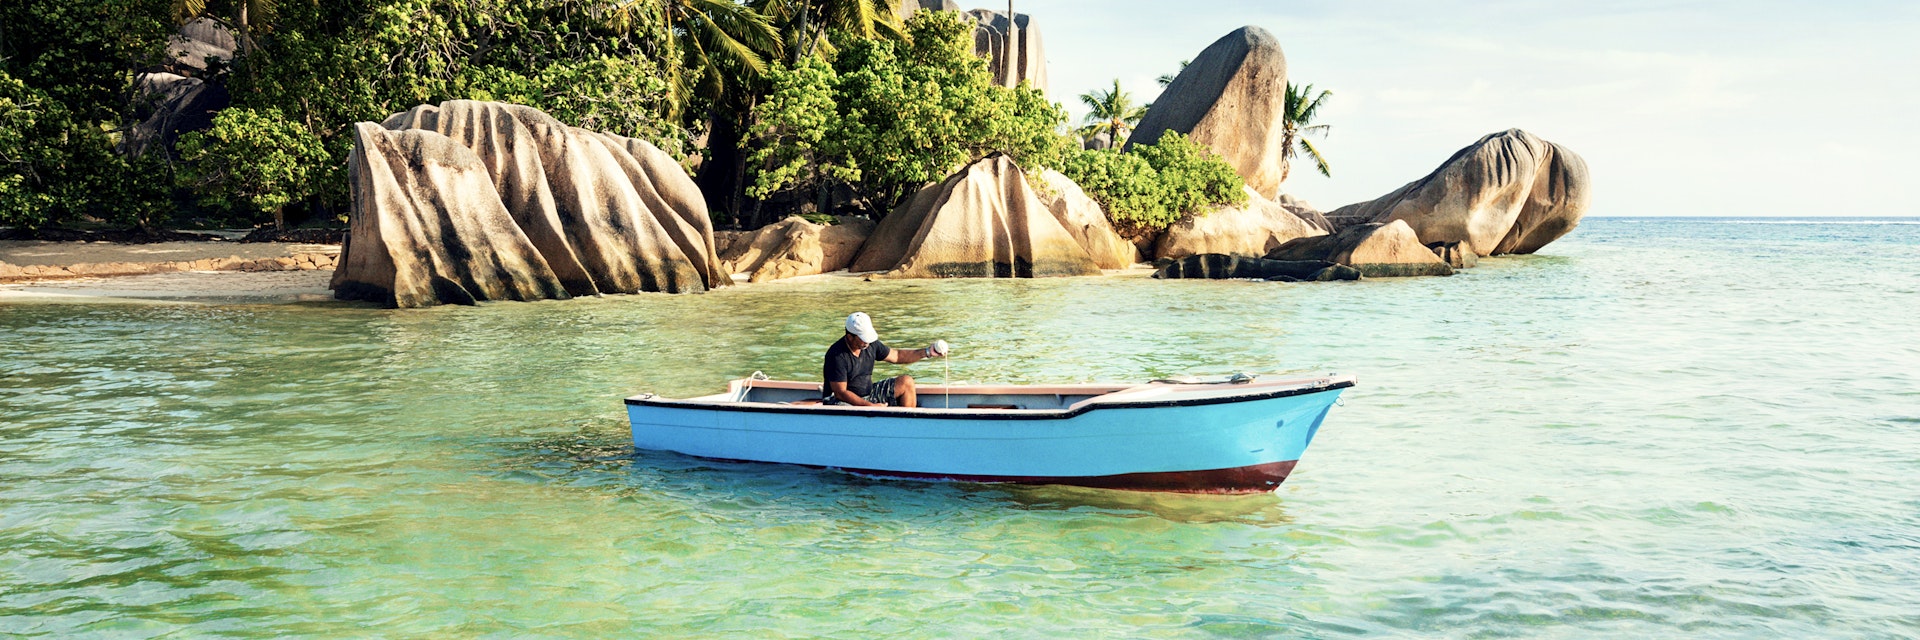 Fishing off Anse Source d’Argent beach in the Seychelles.